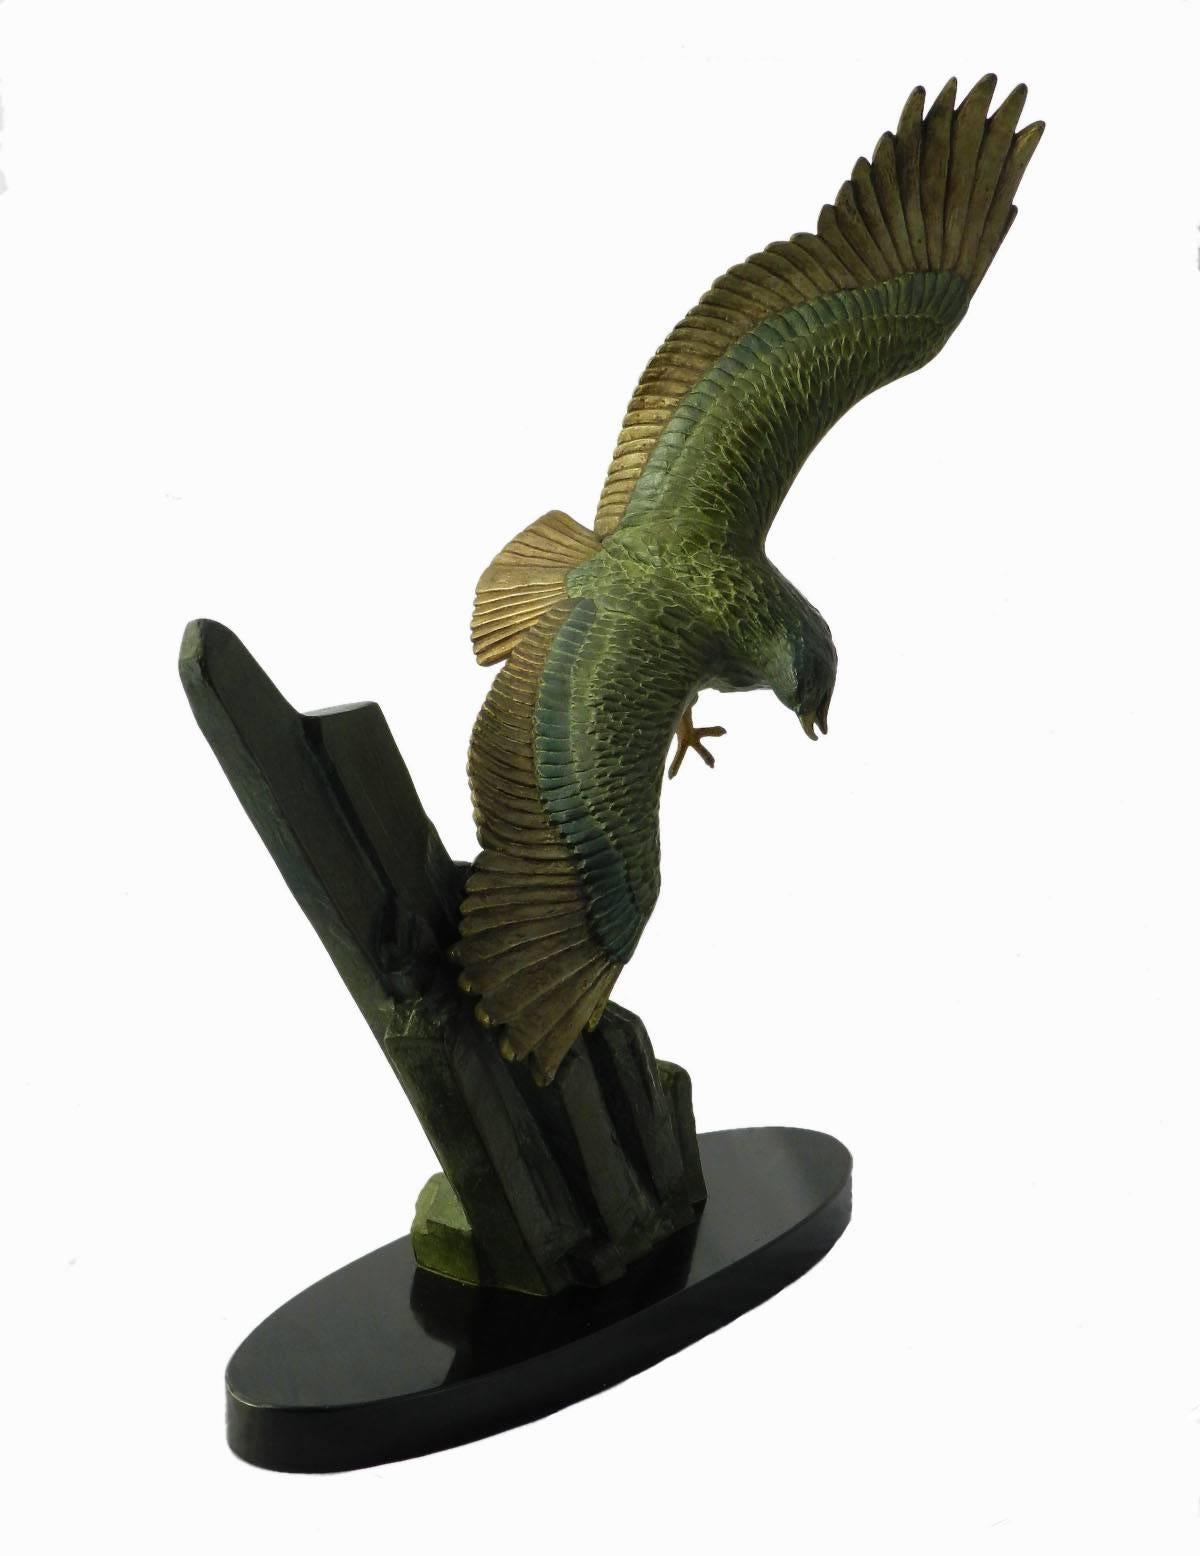 French Art Deco Eagle in Flight by Rulas Signed Sculpture on Marble Base Animalia